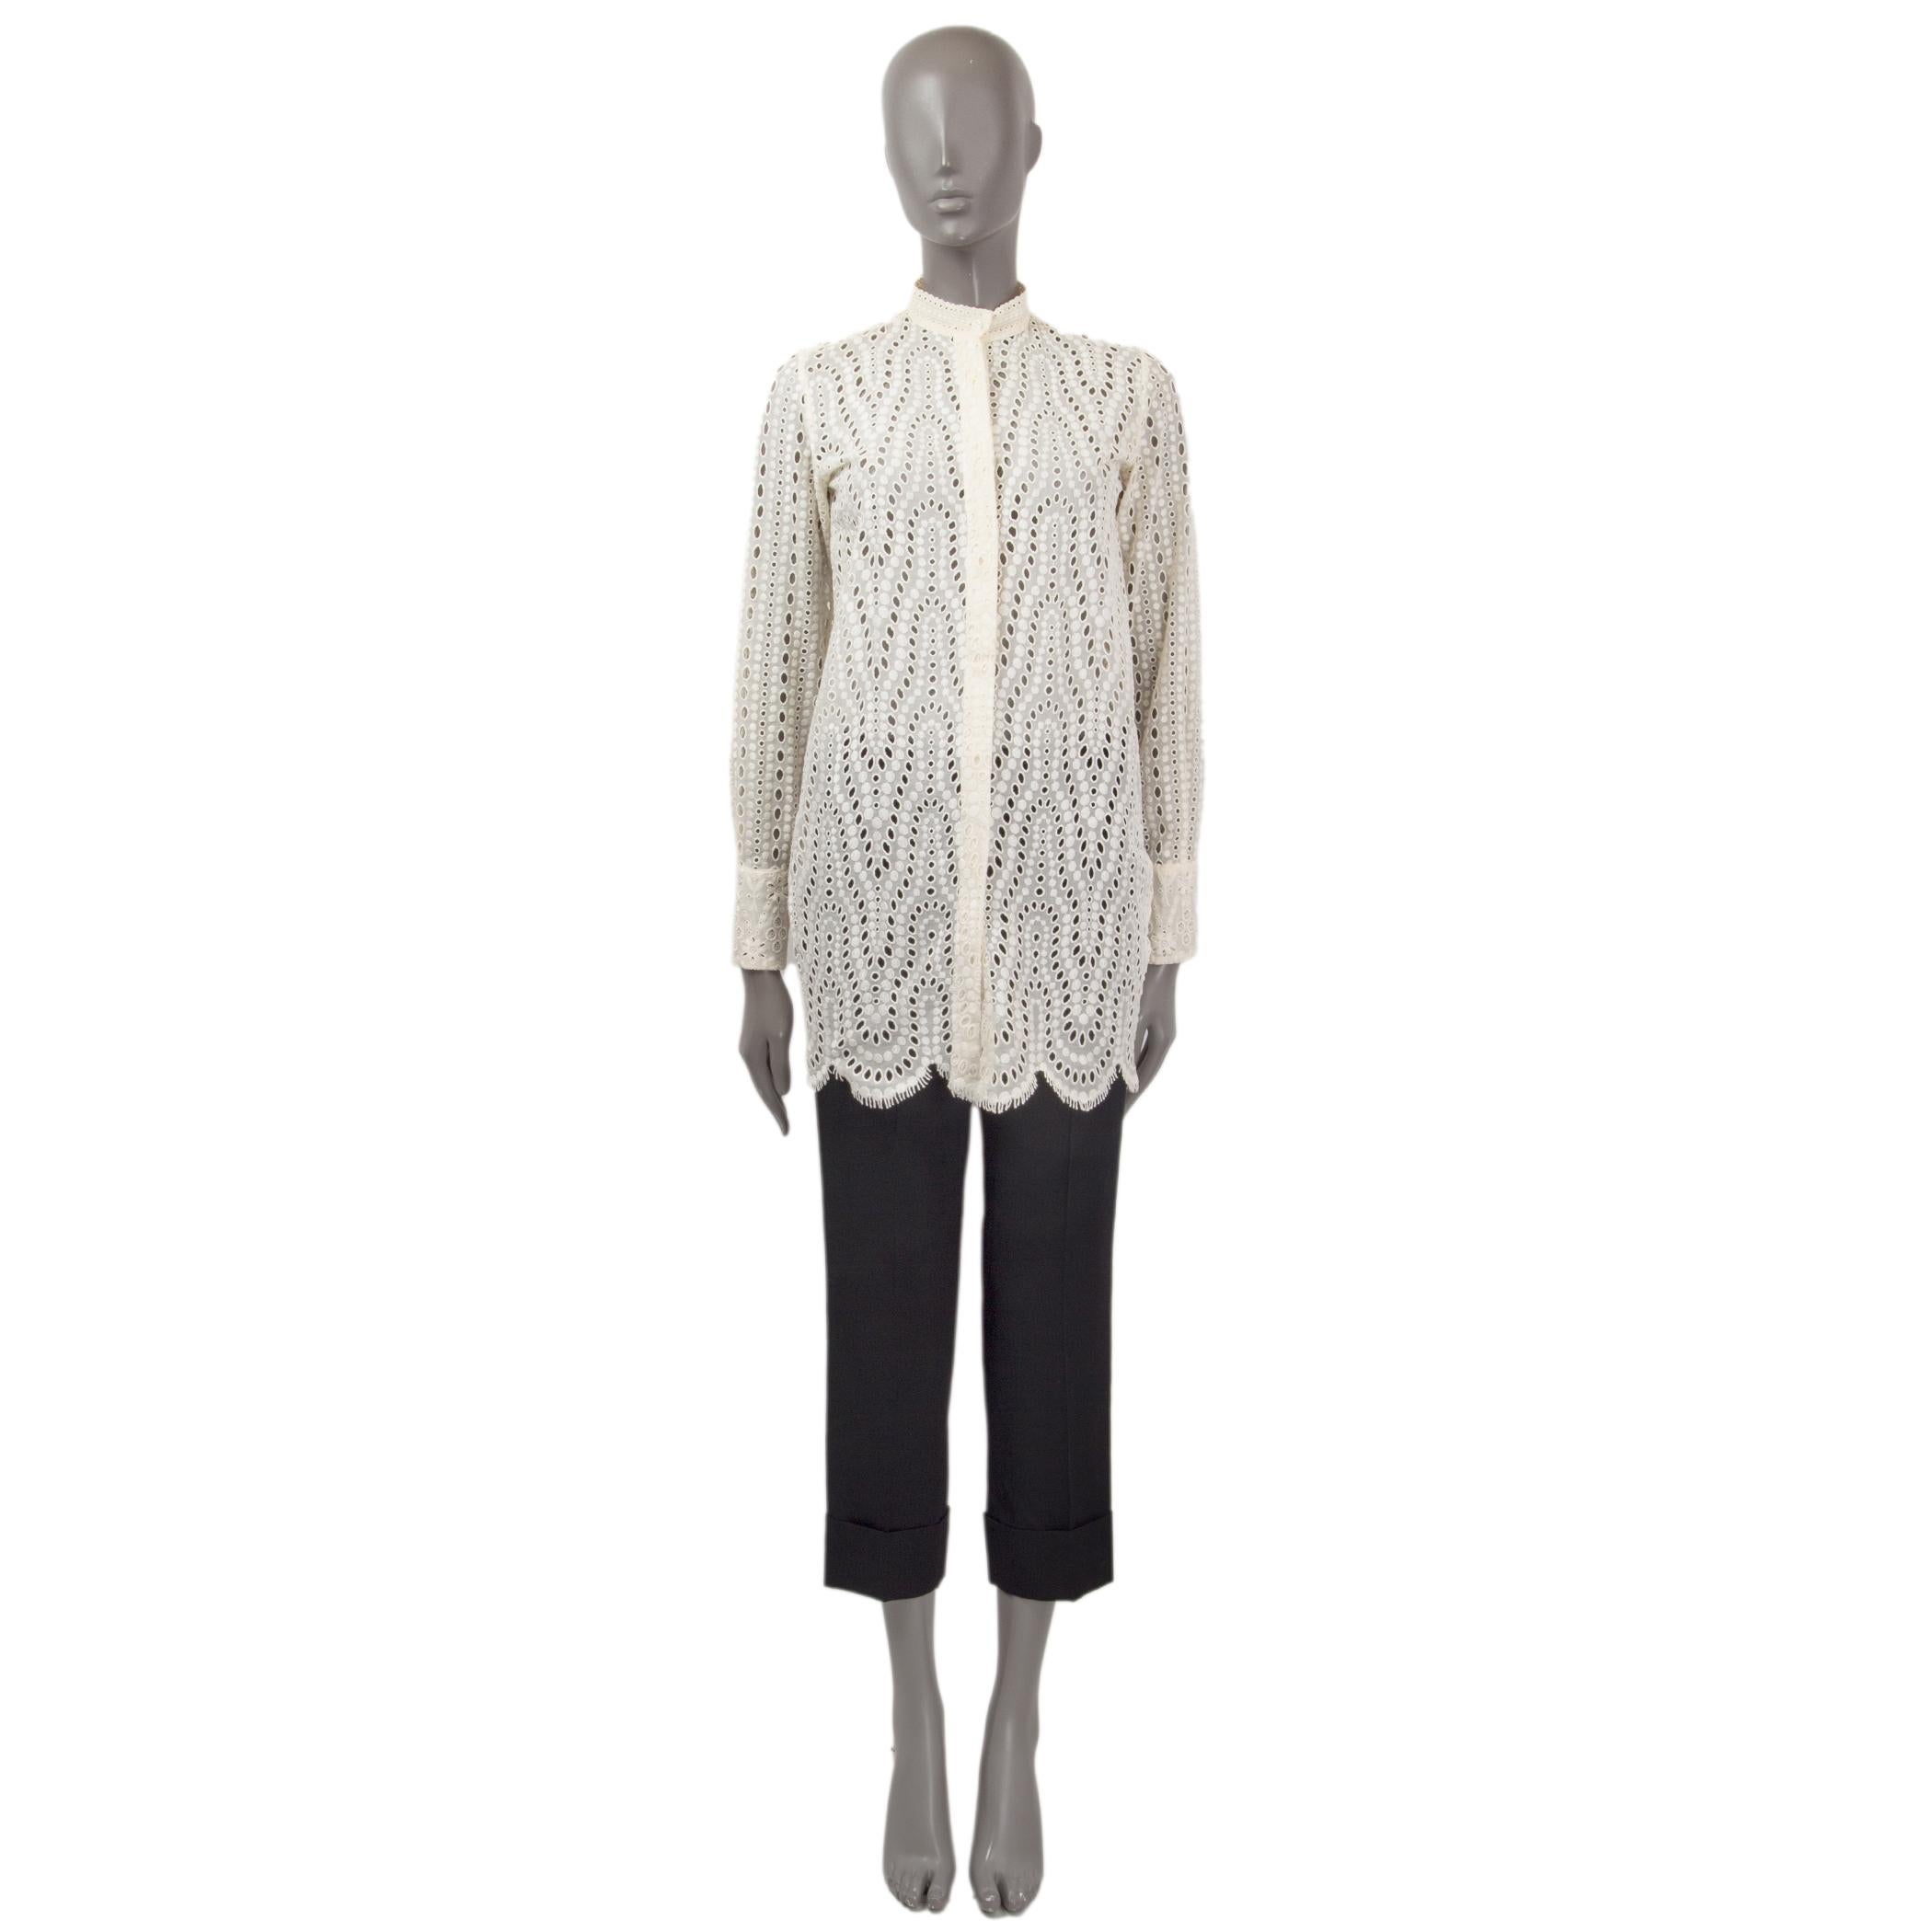 100% authentic Valentino broderie anglaise shirt in ivory cotton (93%) and polyester (7%). Features long sleeves, buttoned cuffs and a high neck. Opens with buttons on the front. Unlined. Has been worn and is in excellent